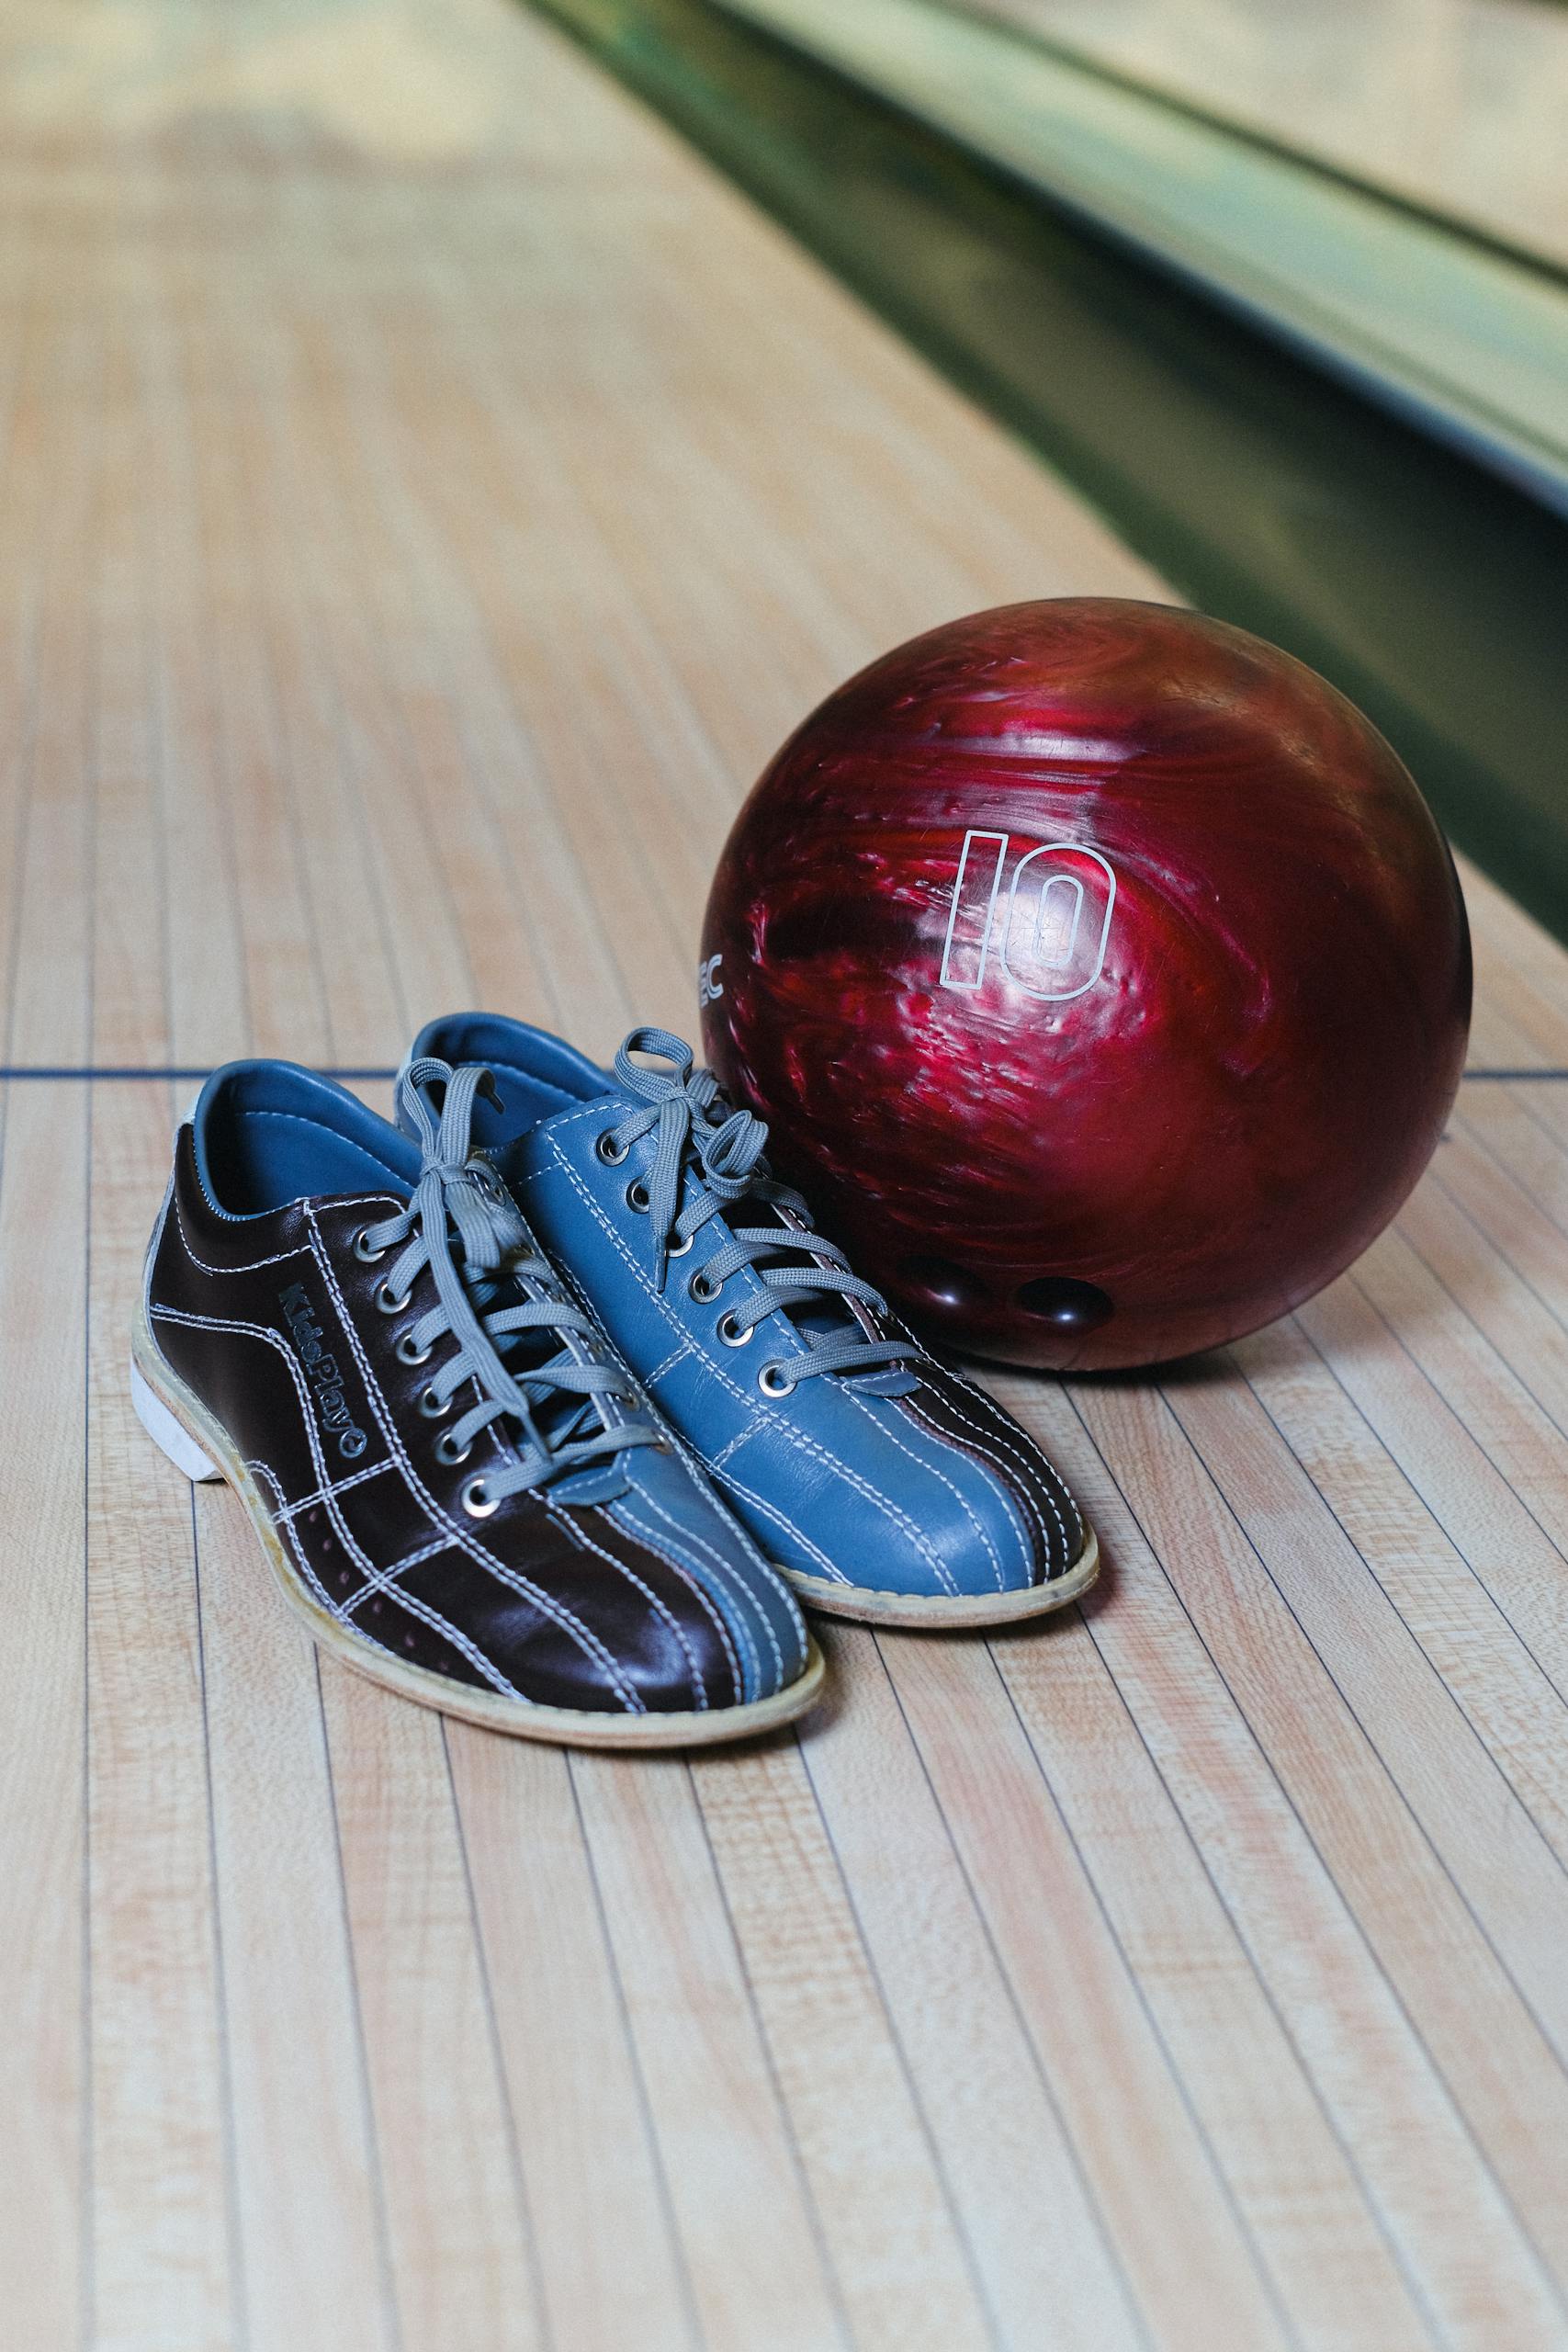 Bowling Shoes and Ball on Wooden Floor